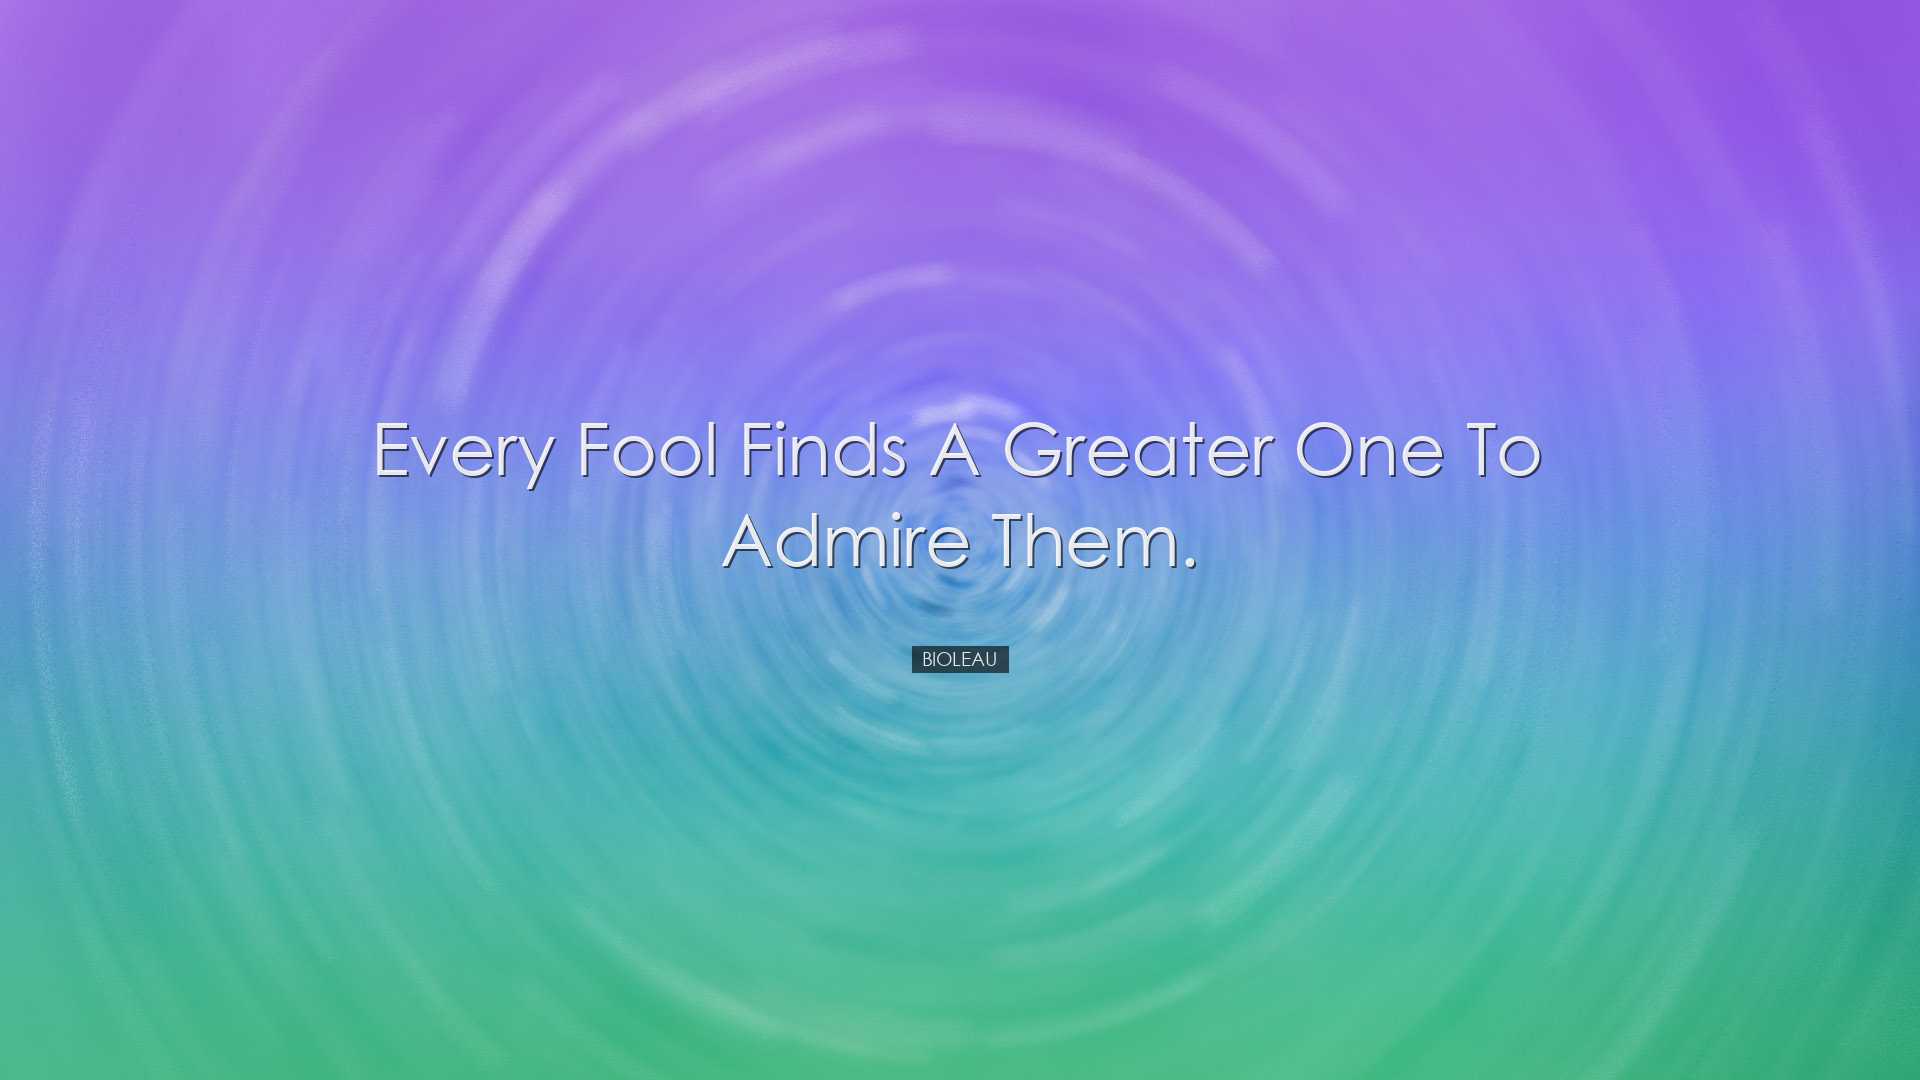 Every fool finds a greater one to admire them. - Bioleau